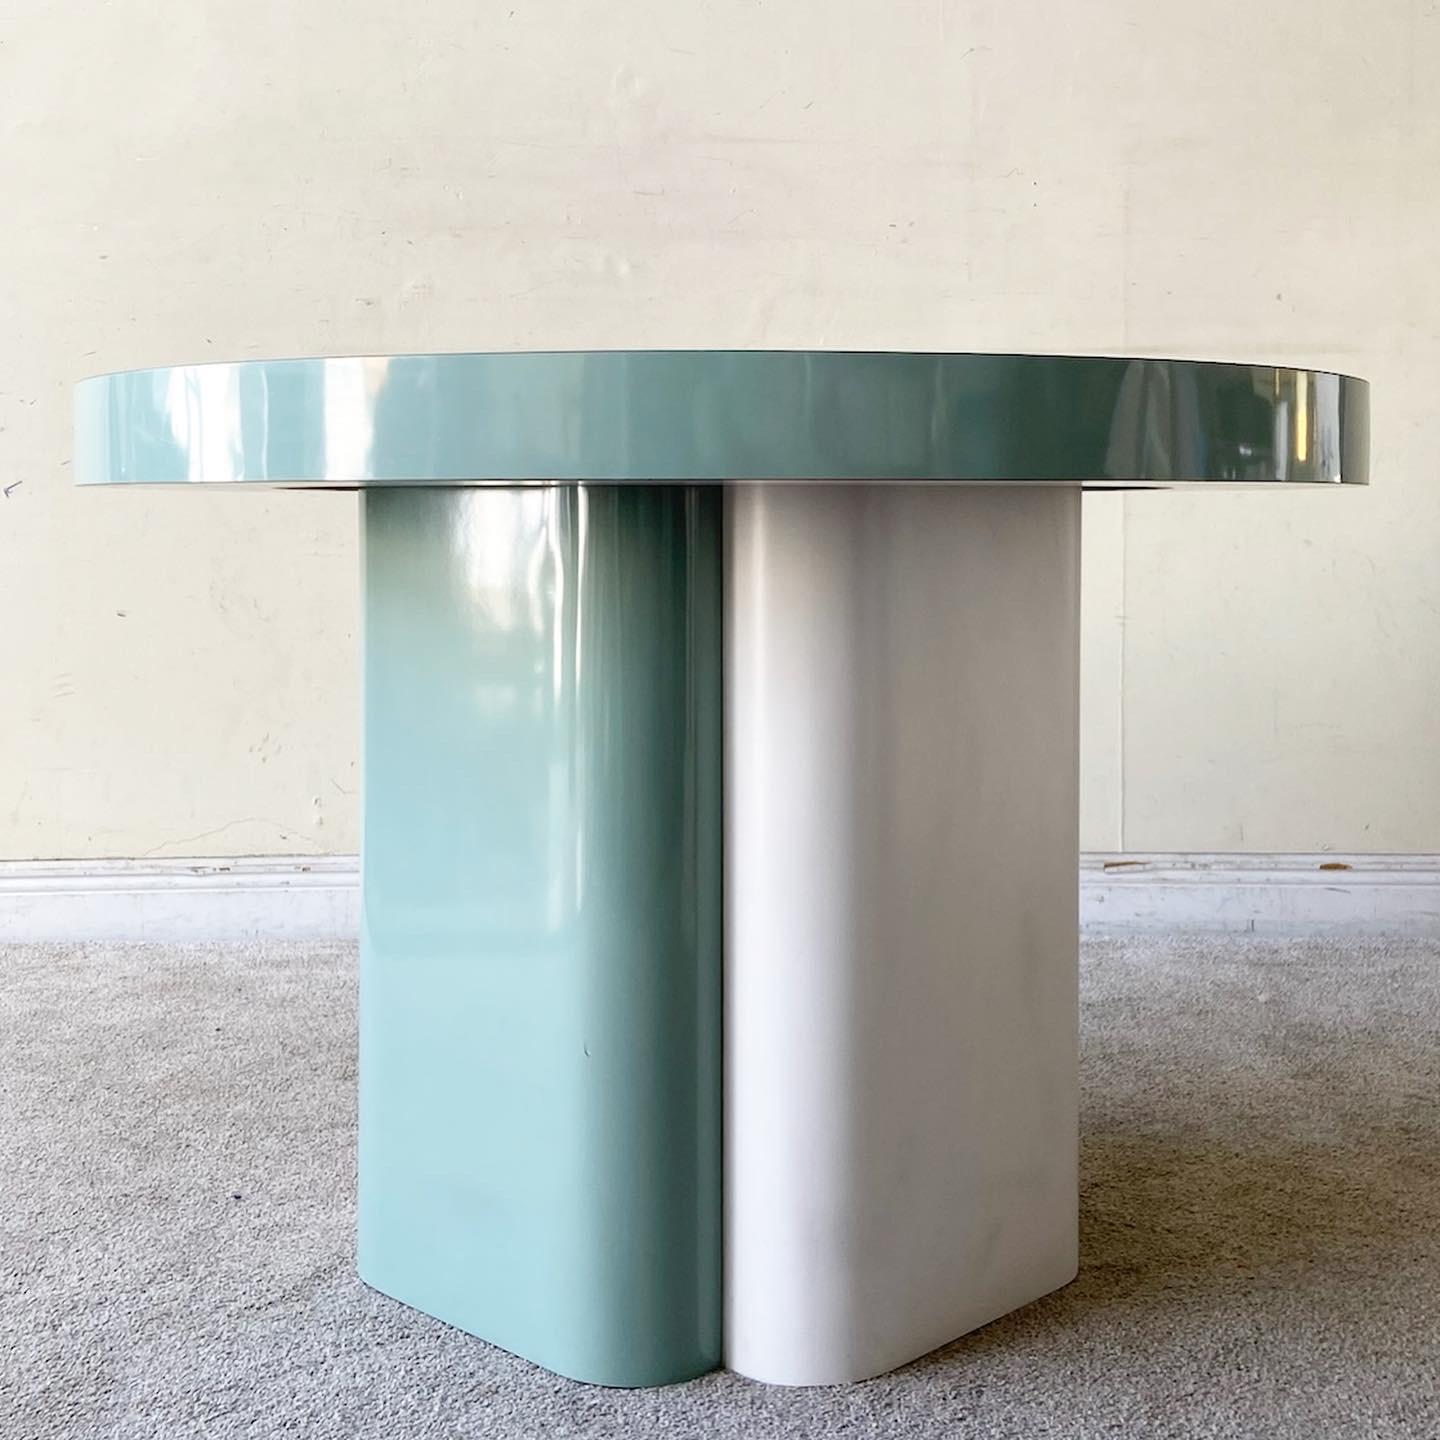 Incredible vintage Postmodern circular top dining table. Features a soft minty green and white lacquer laminate.
